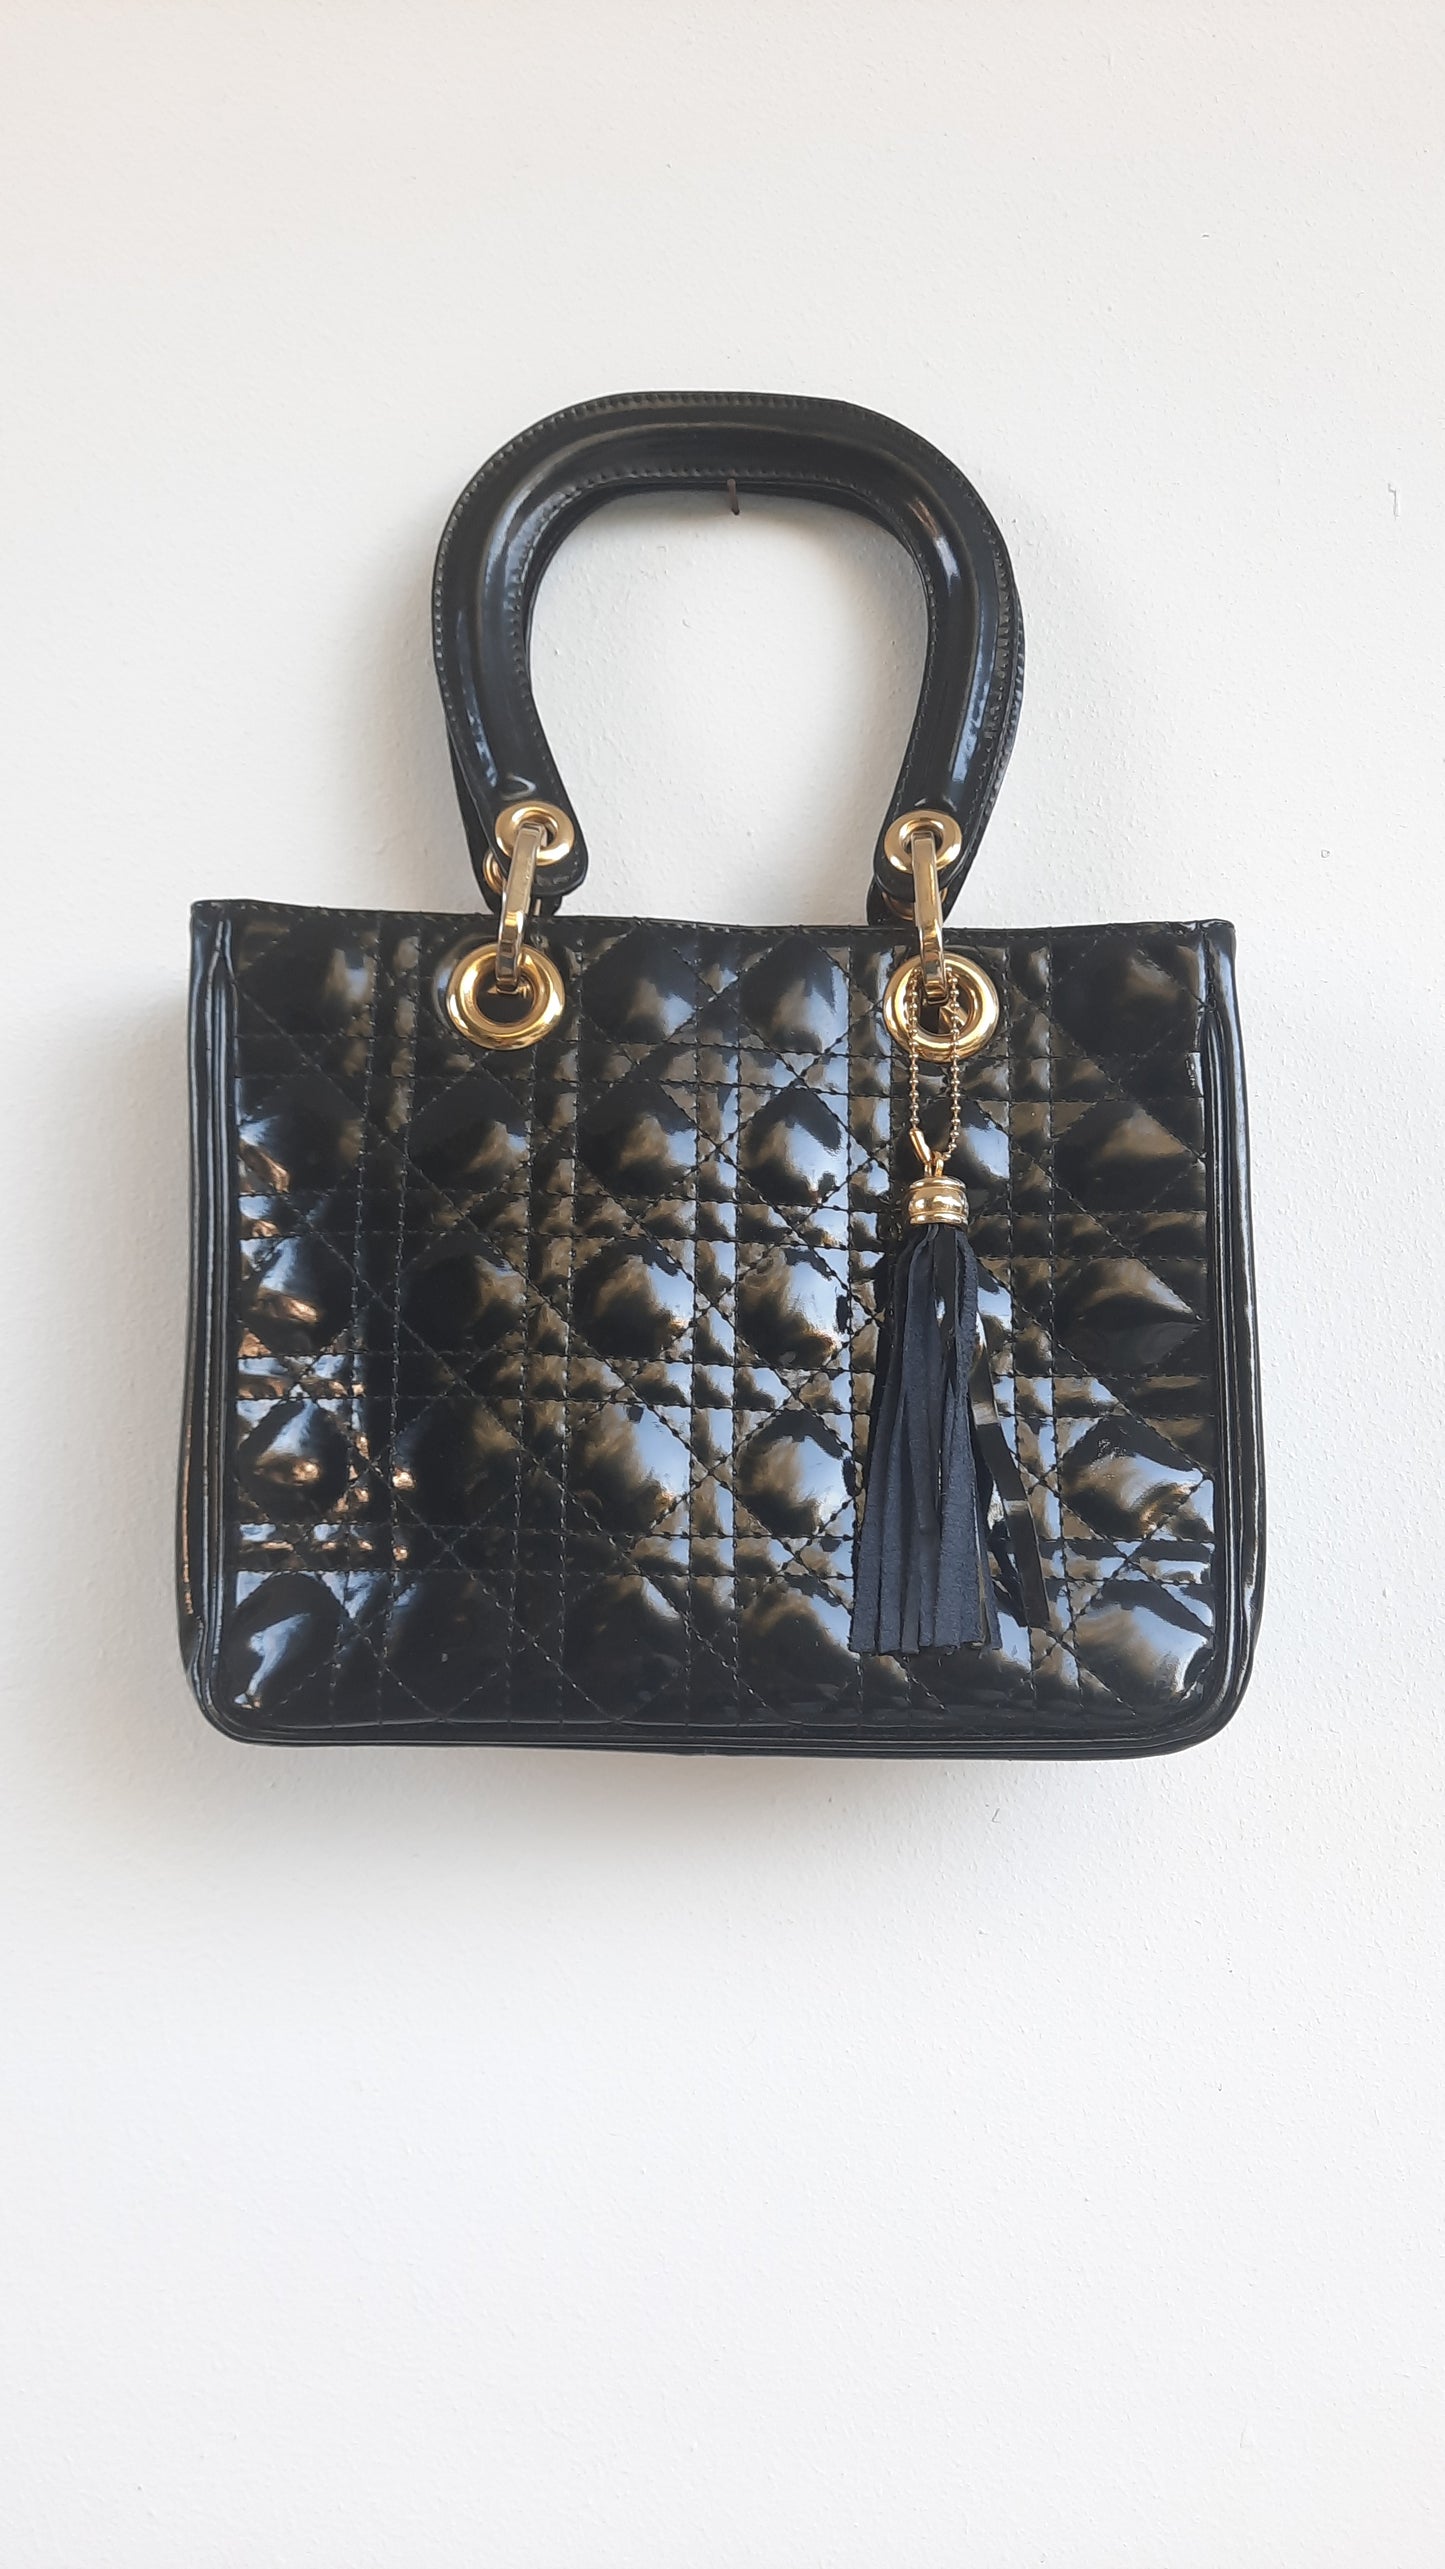 Vintage Black Patent Leather Quilted Handbag, Made in Cyprus